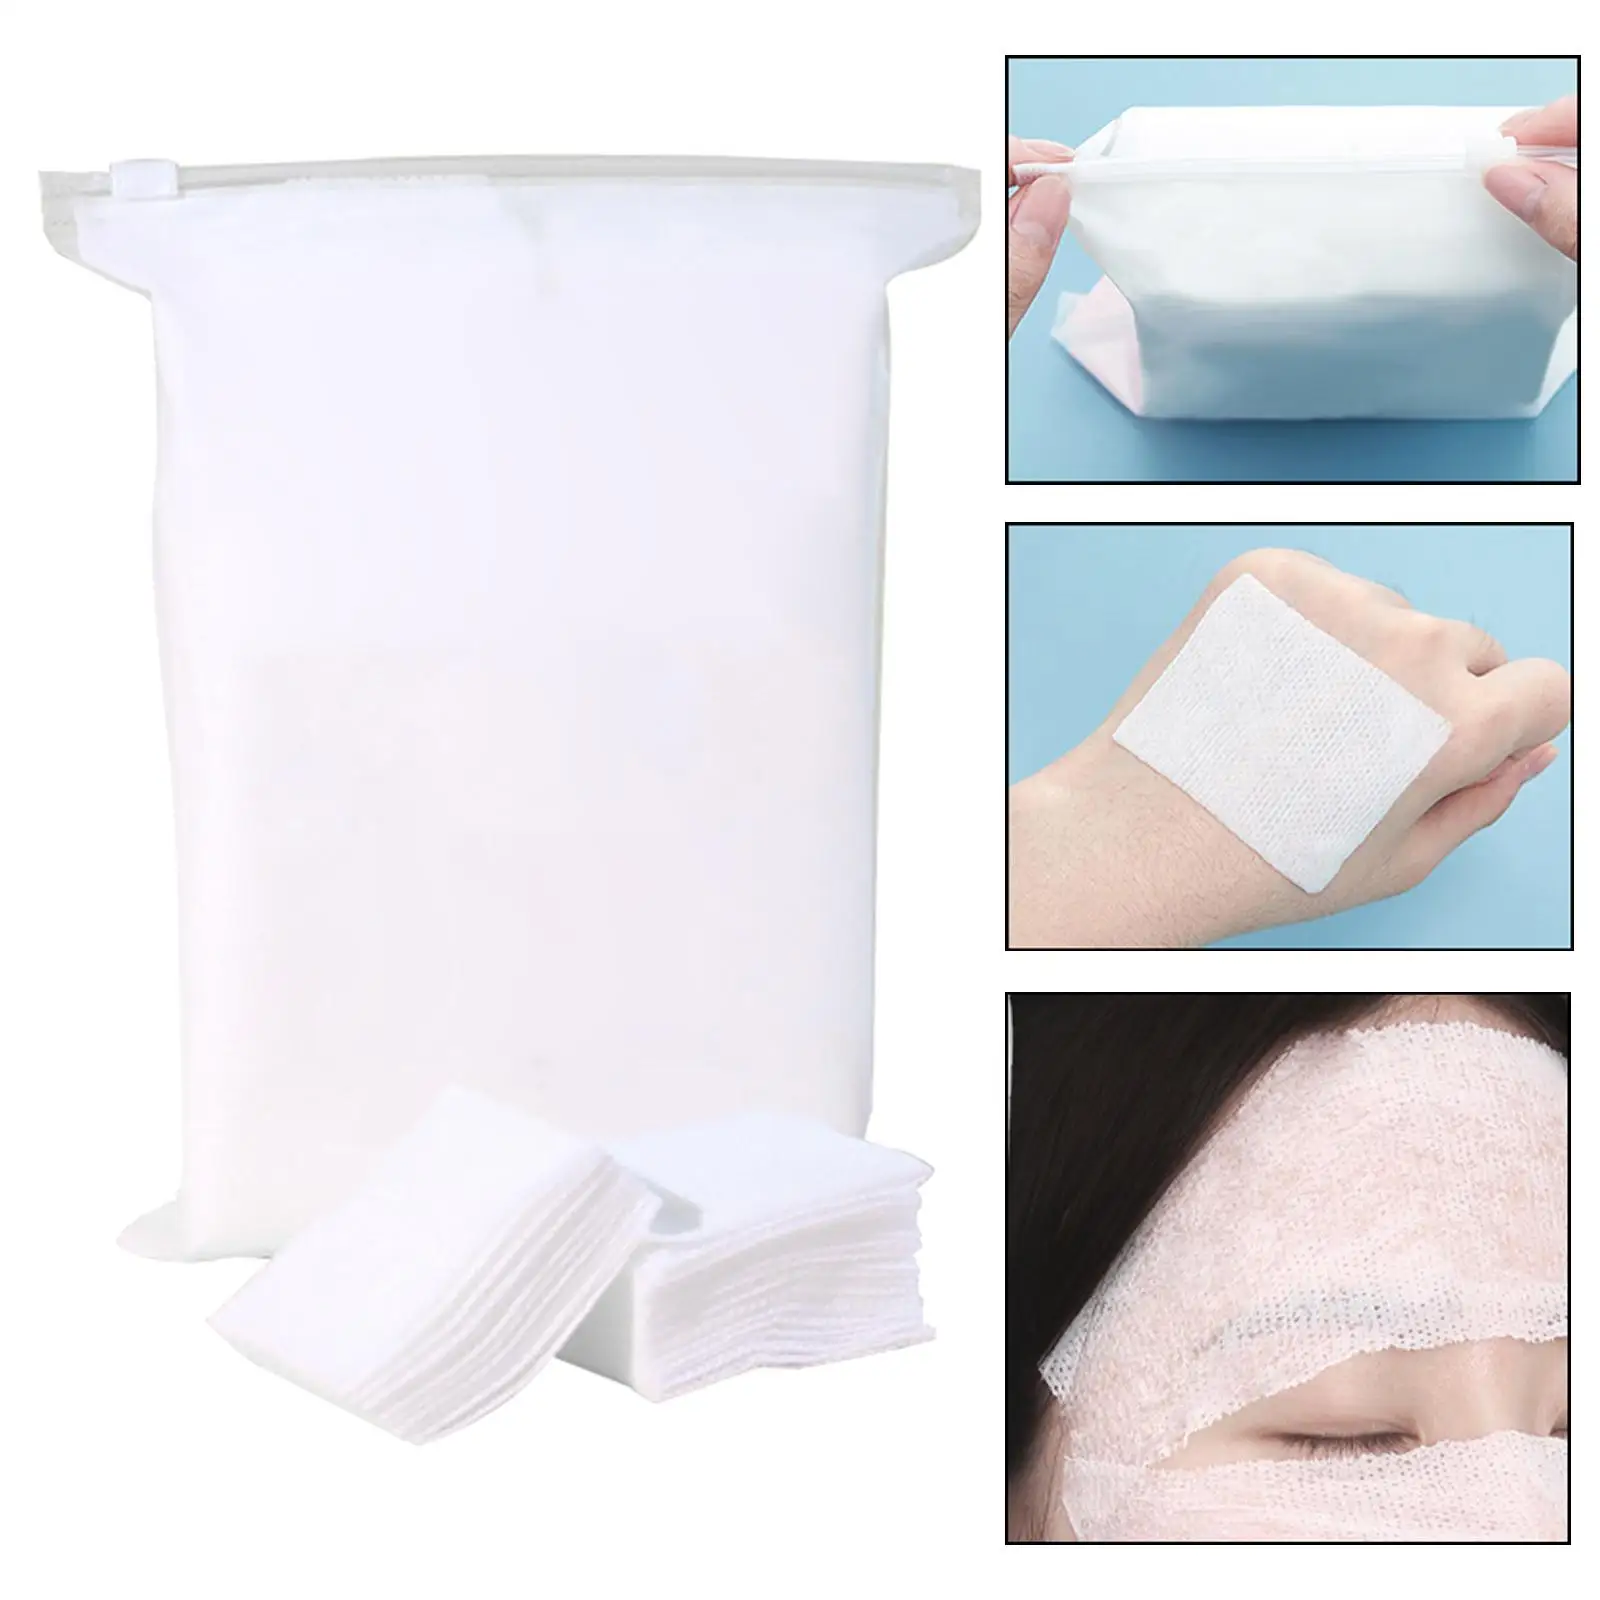 600 Pieces Stretchable Cotton Pads Soft Unbleached Thin Breathable Facial Cleansing Cloth for Skincare Apply Toner Face Nails